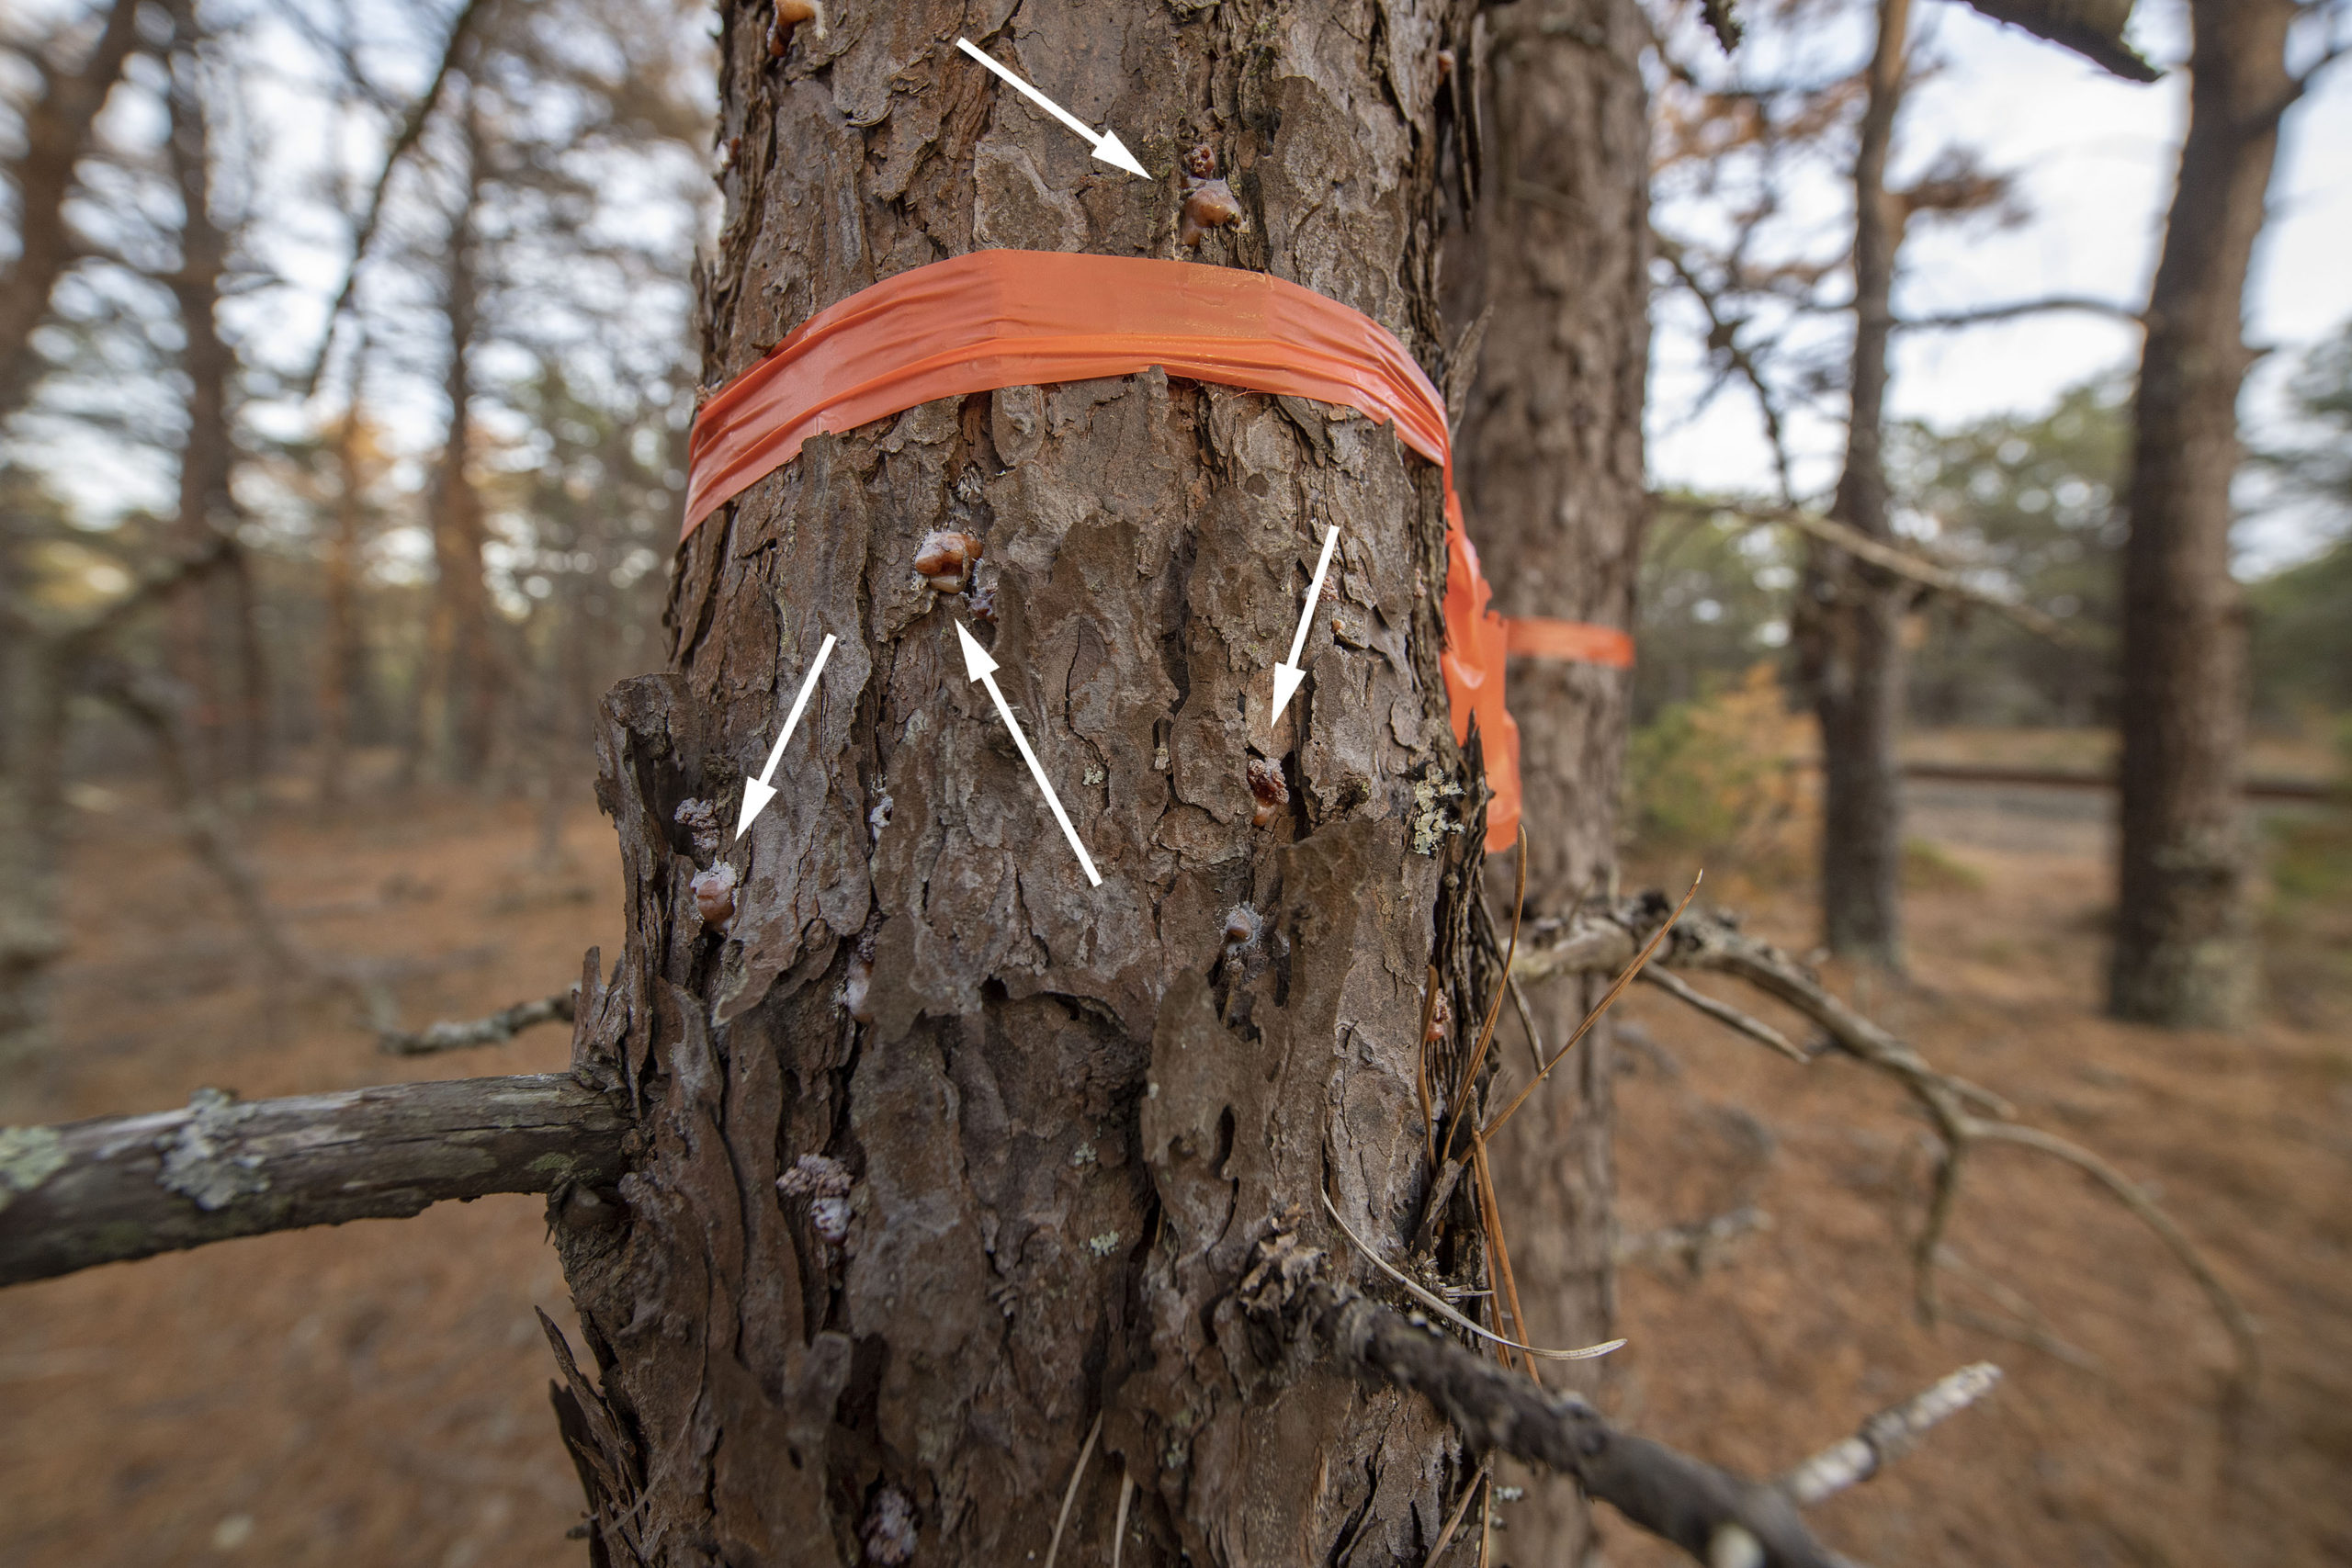 Southern pine beetles, and their telltale bubbles of sap oozing from tree bark, have been found in hundreds of trees in Napeague State Park.